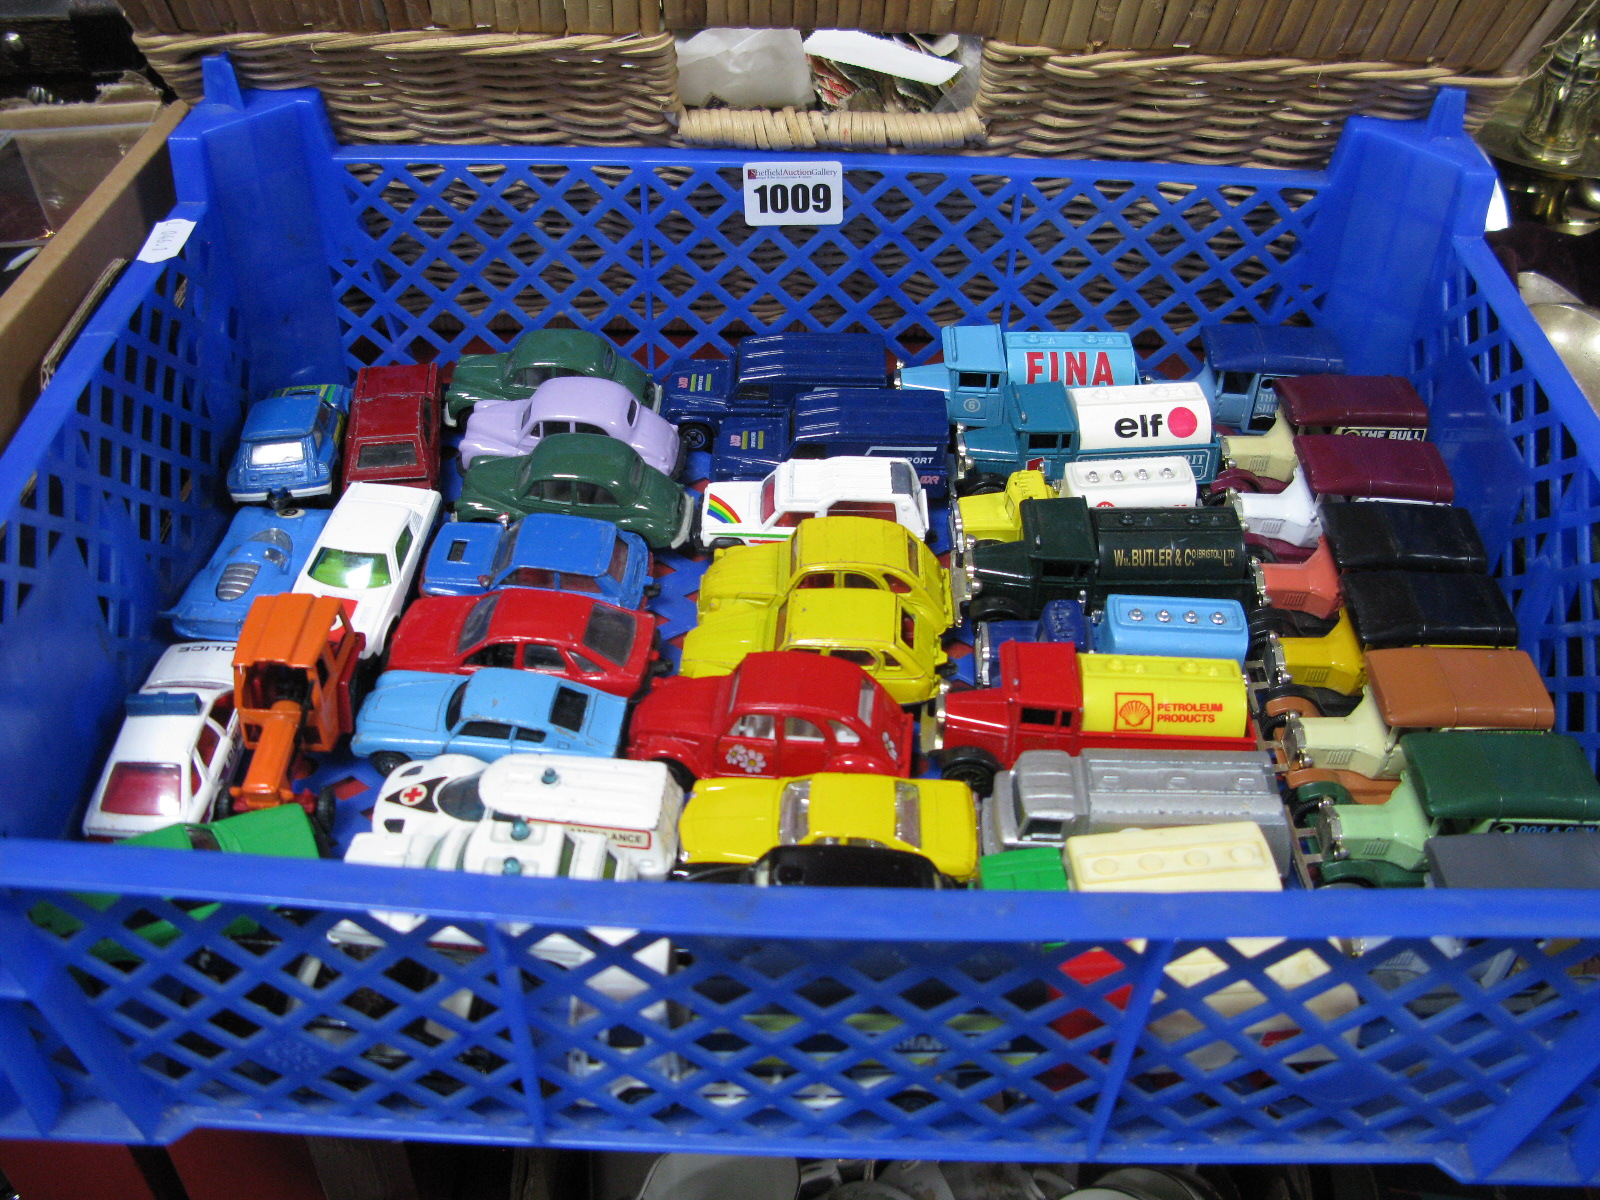 Over Forty Diecast and Plastic Corgi Juniors - including cars, commercial and vintage vehicles:- One